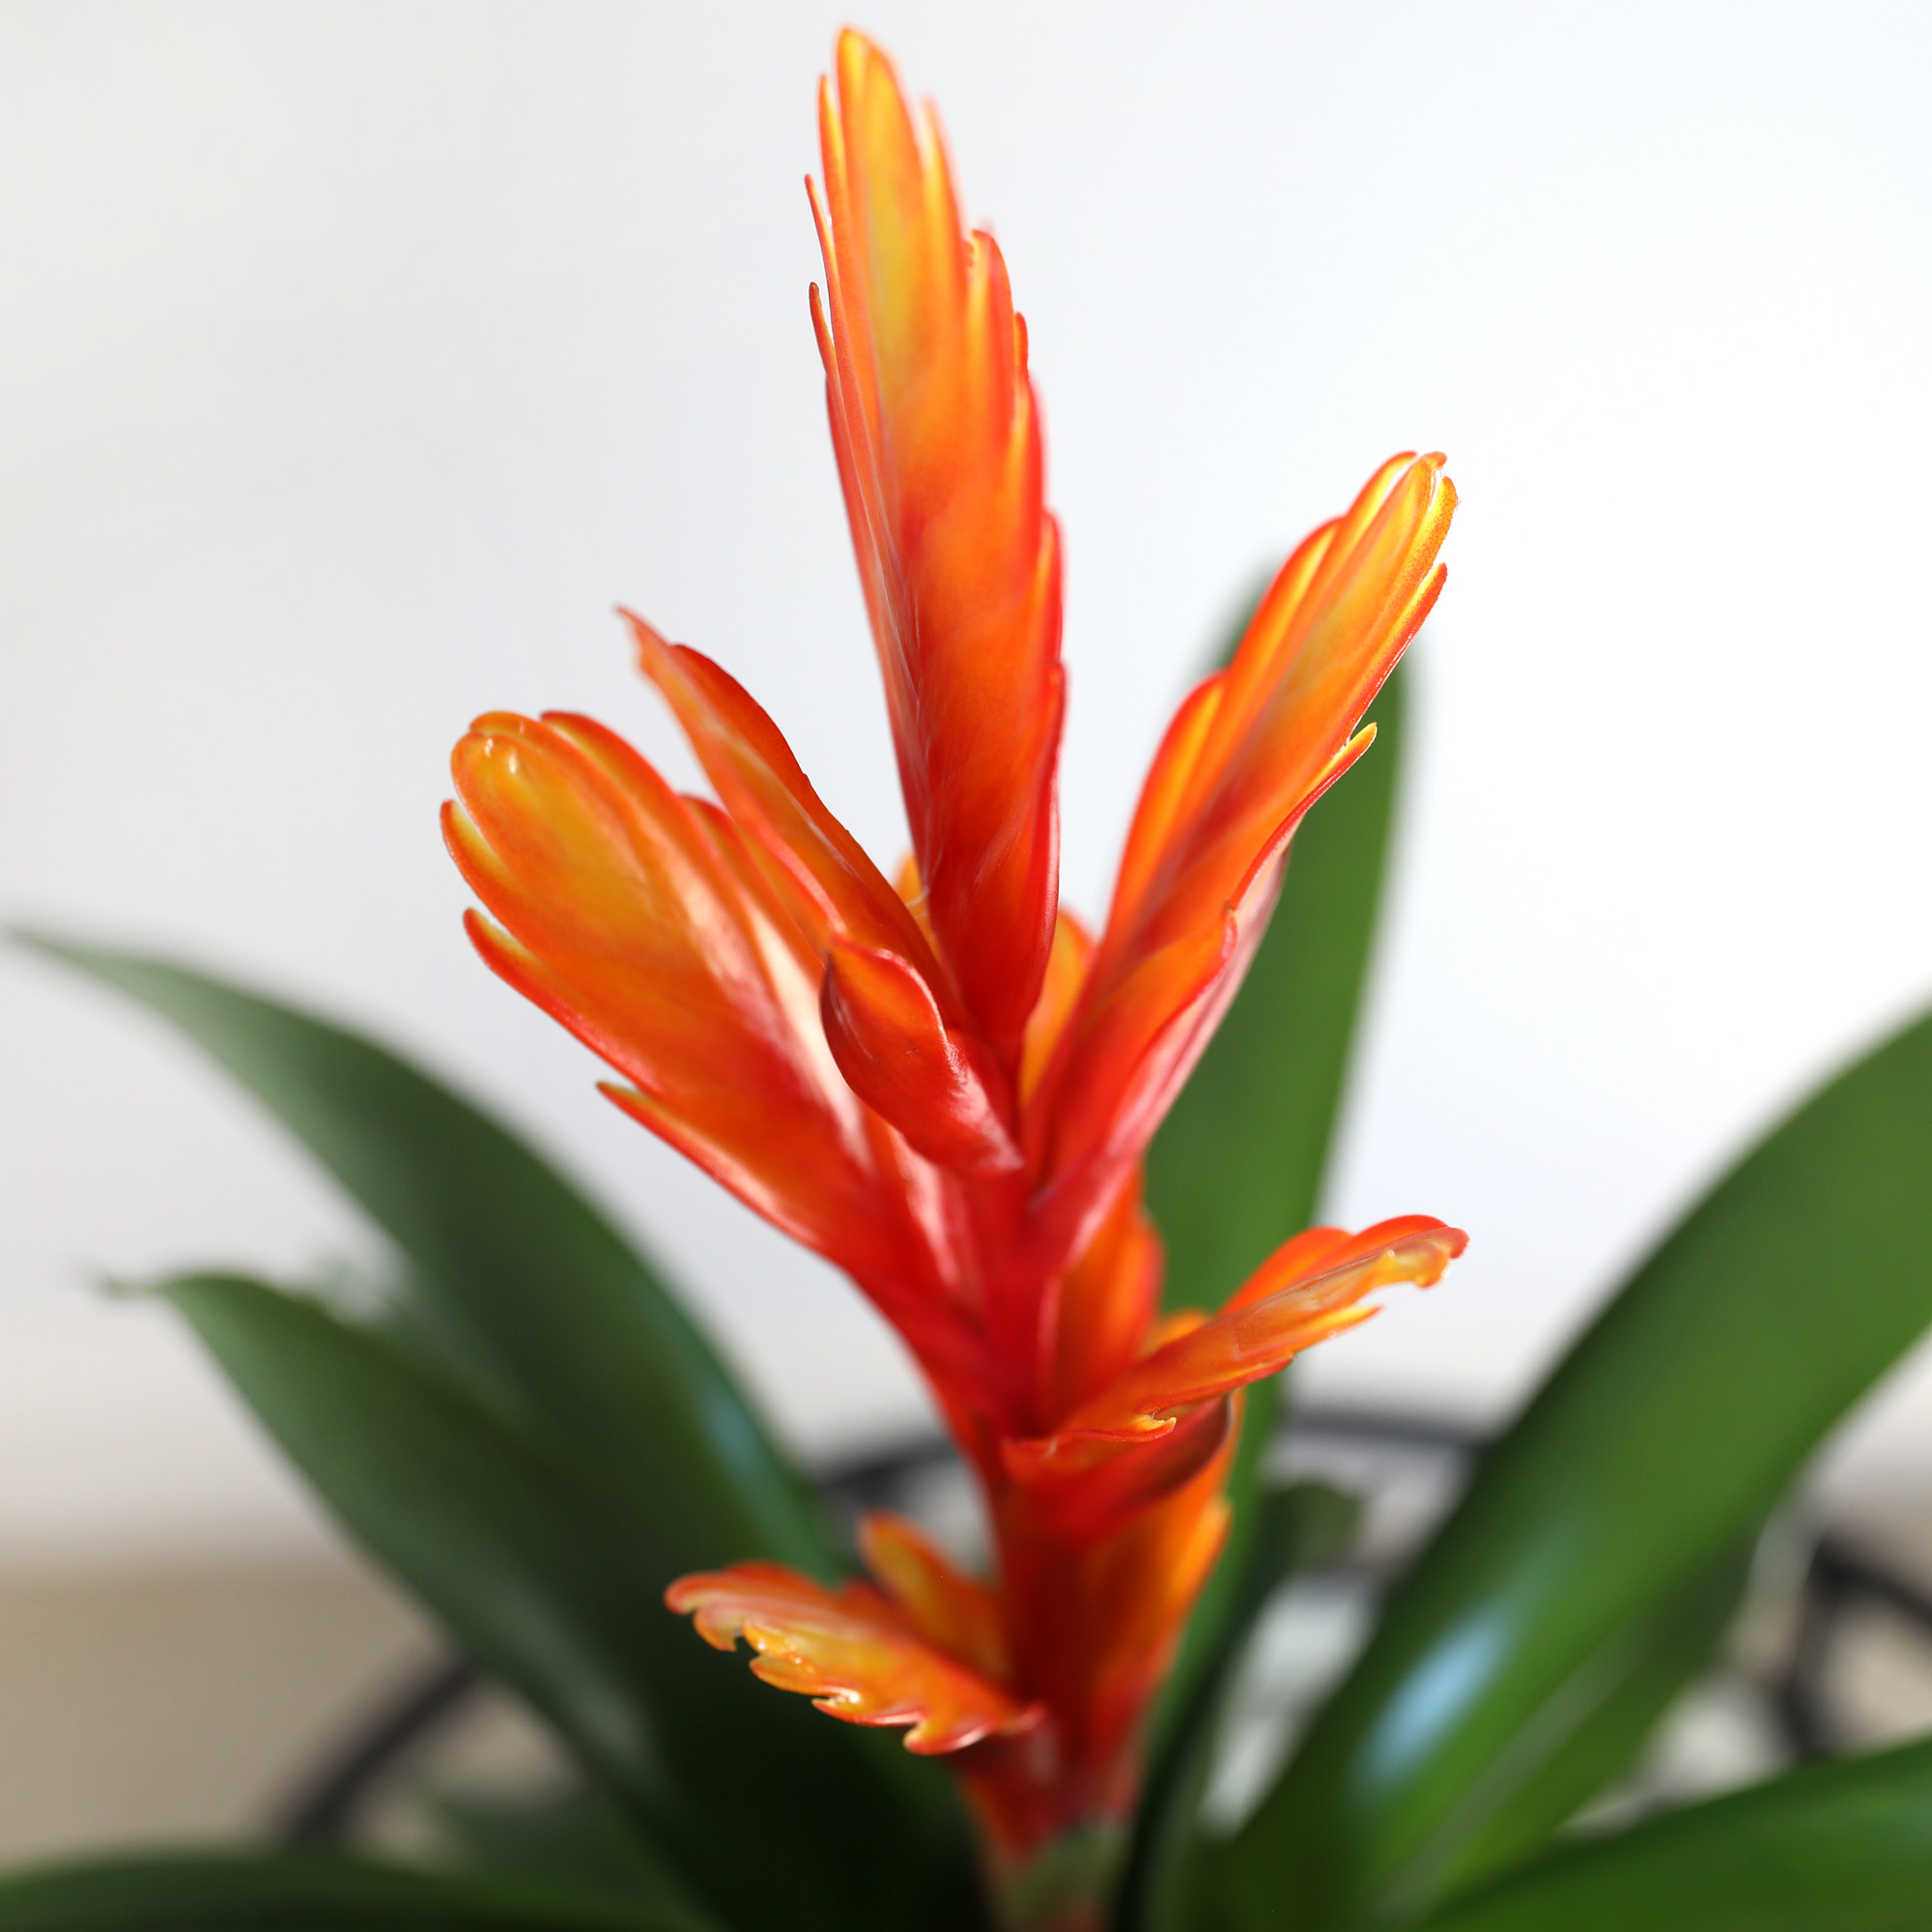 Just Add Ice 15" Tall Orange Vriesea Bromeliad Live Plant in 5" Moss Topped Brown Wood Pot, House Plant - image 2 of 6